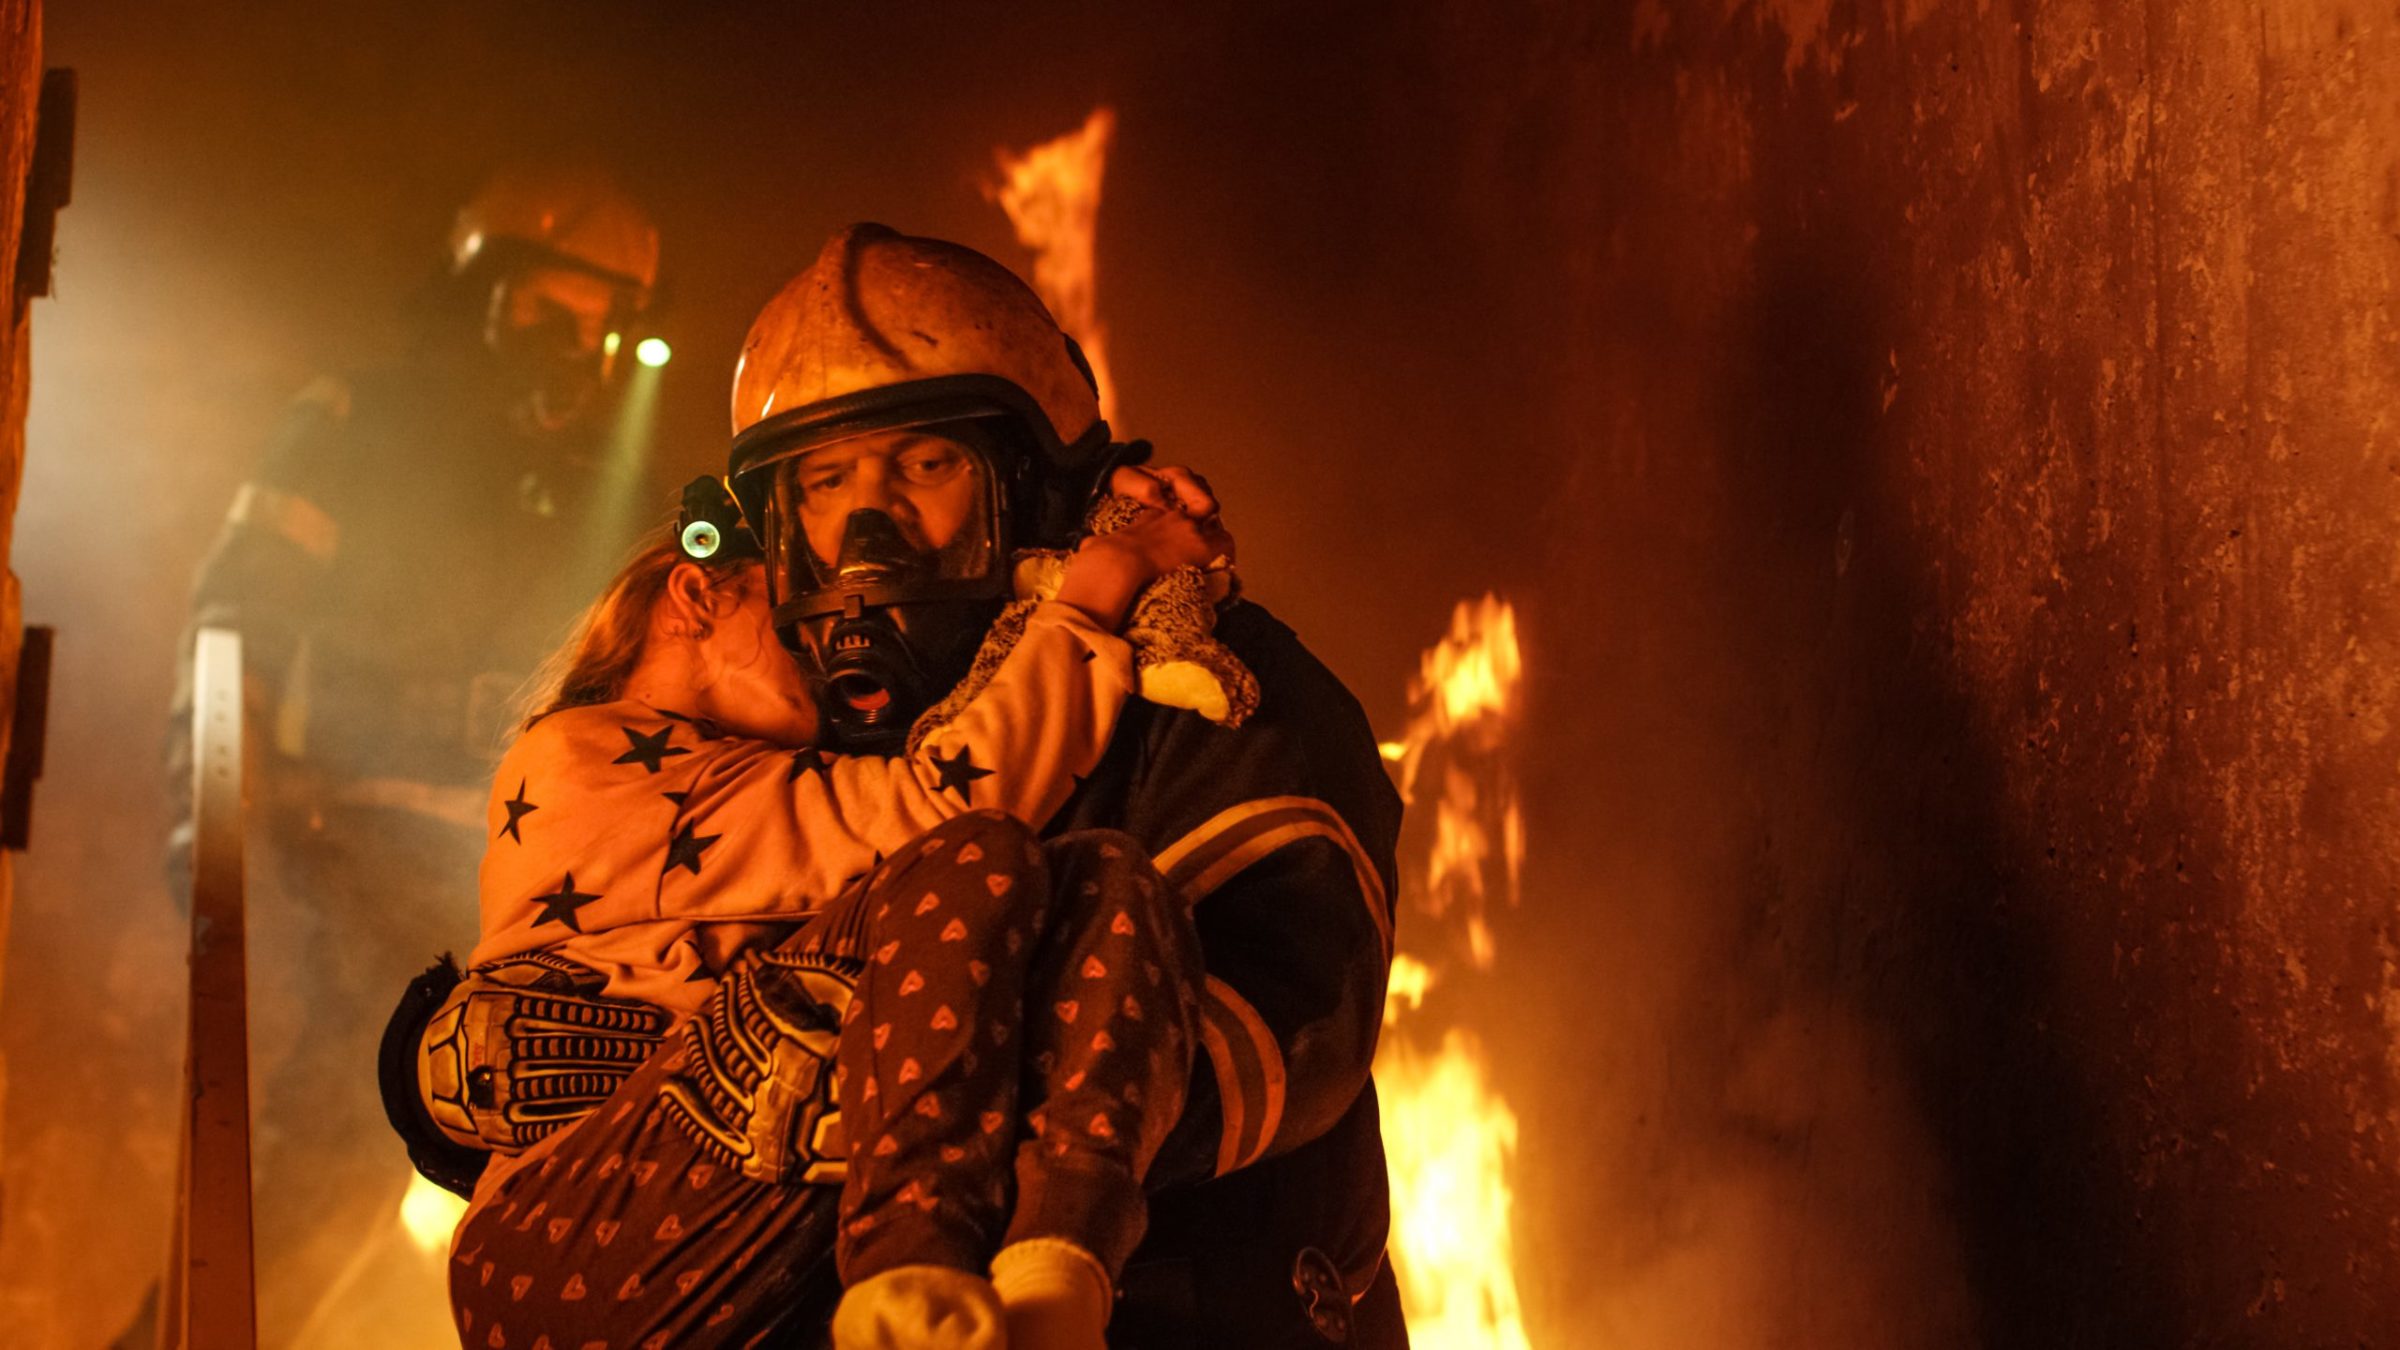 3 Heroic Firefighting Stories for International Firefighters’ Day